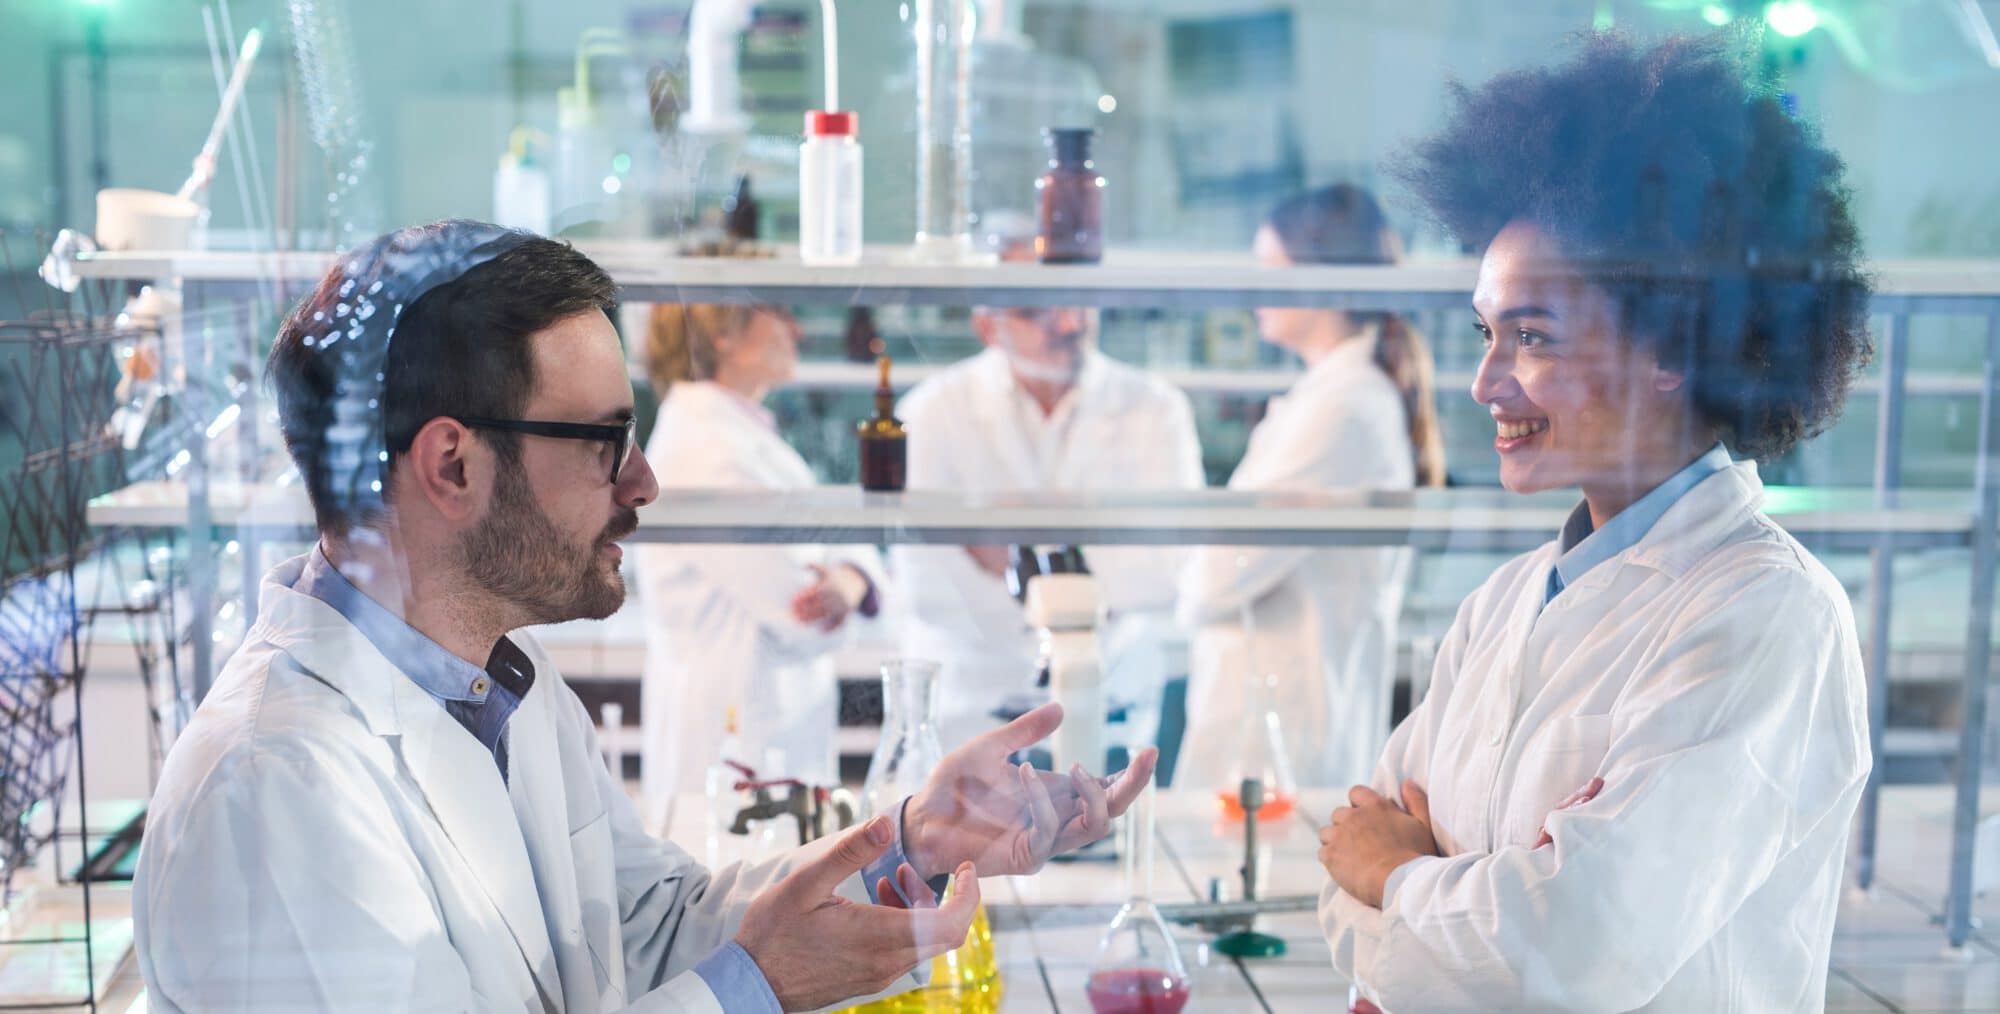 Two scientists discussing about research while working in laboratory. There are people in the background. The view is through glass.